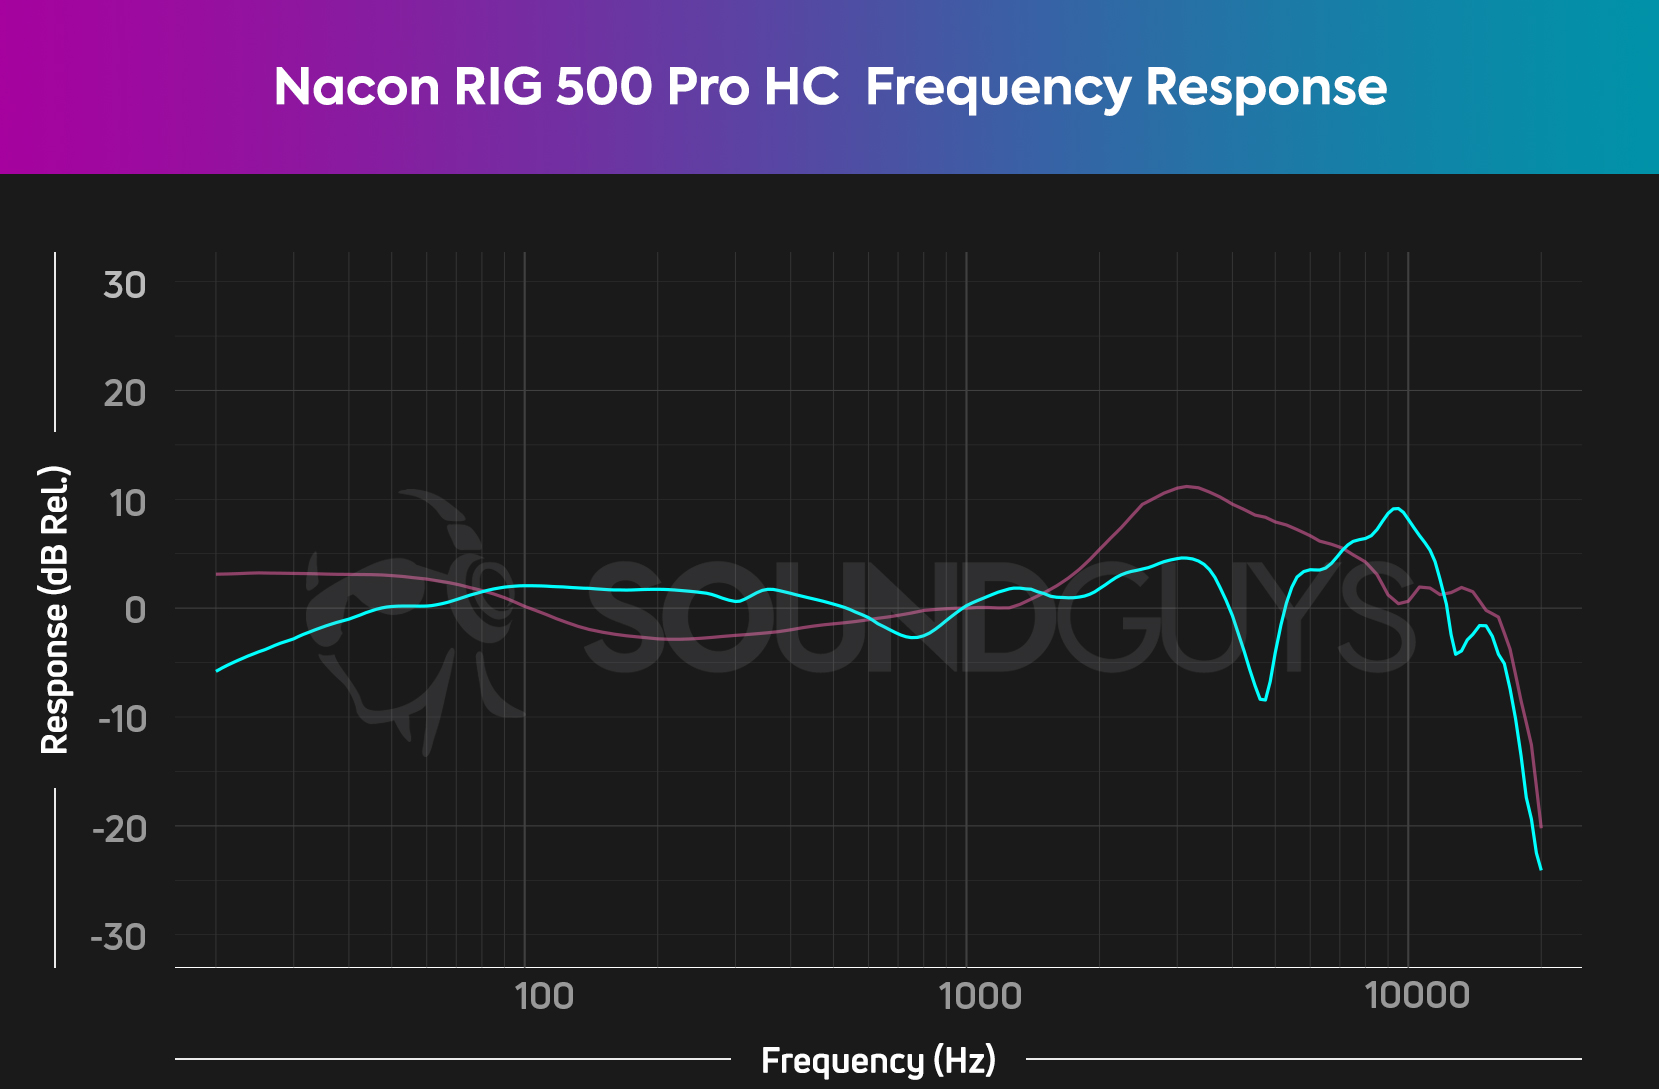 A frequency response chart for the Nacon RIG 500 Pro HC gaming headset, which shows a slight de-emphasis of bass range sound, boosted mids, and a drop in the highs